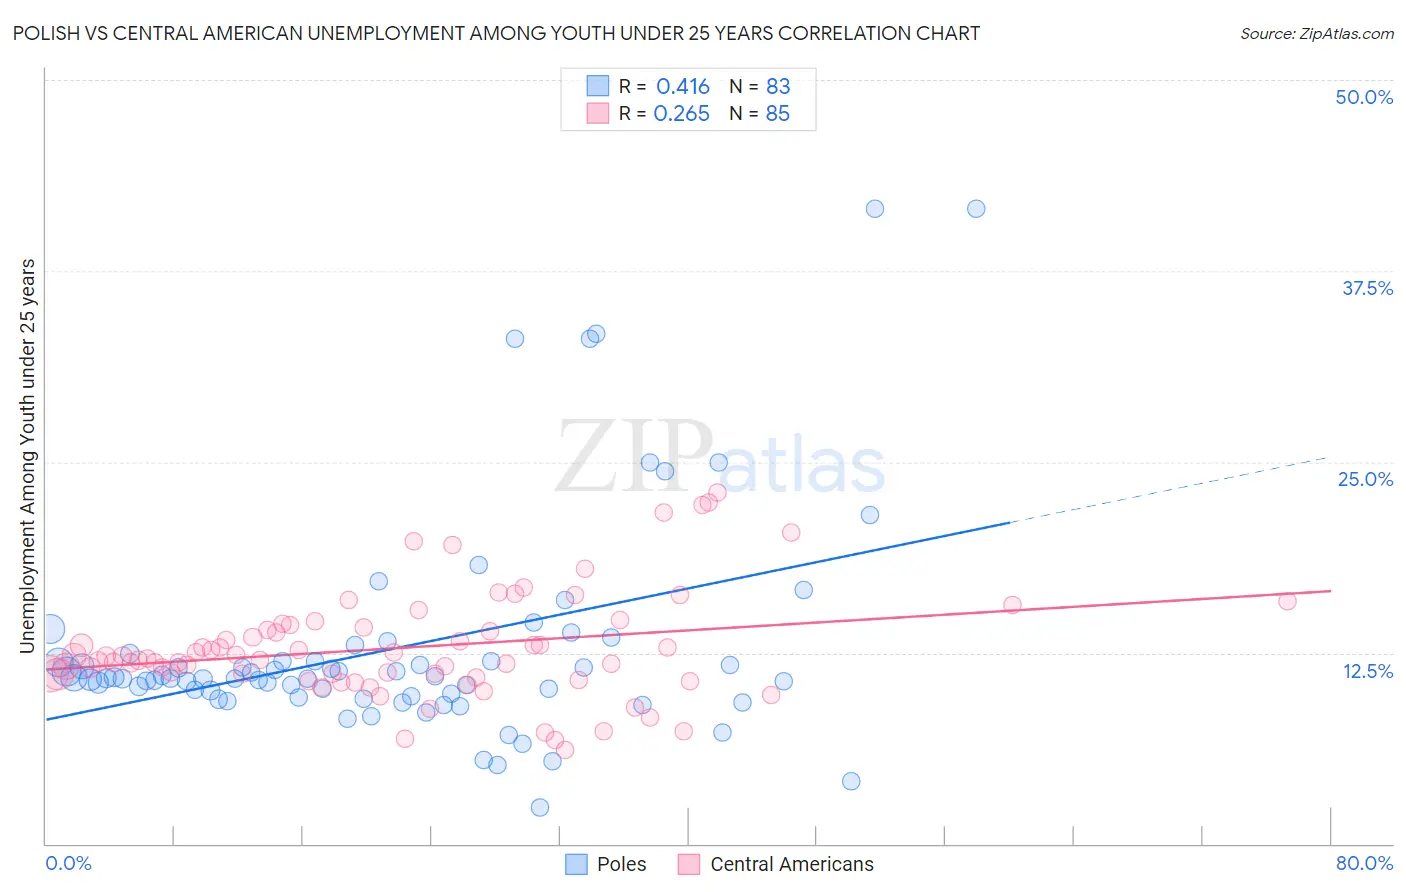 Polish vs Central American Unemployment Among Youth under 25 years